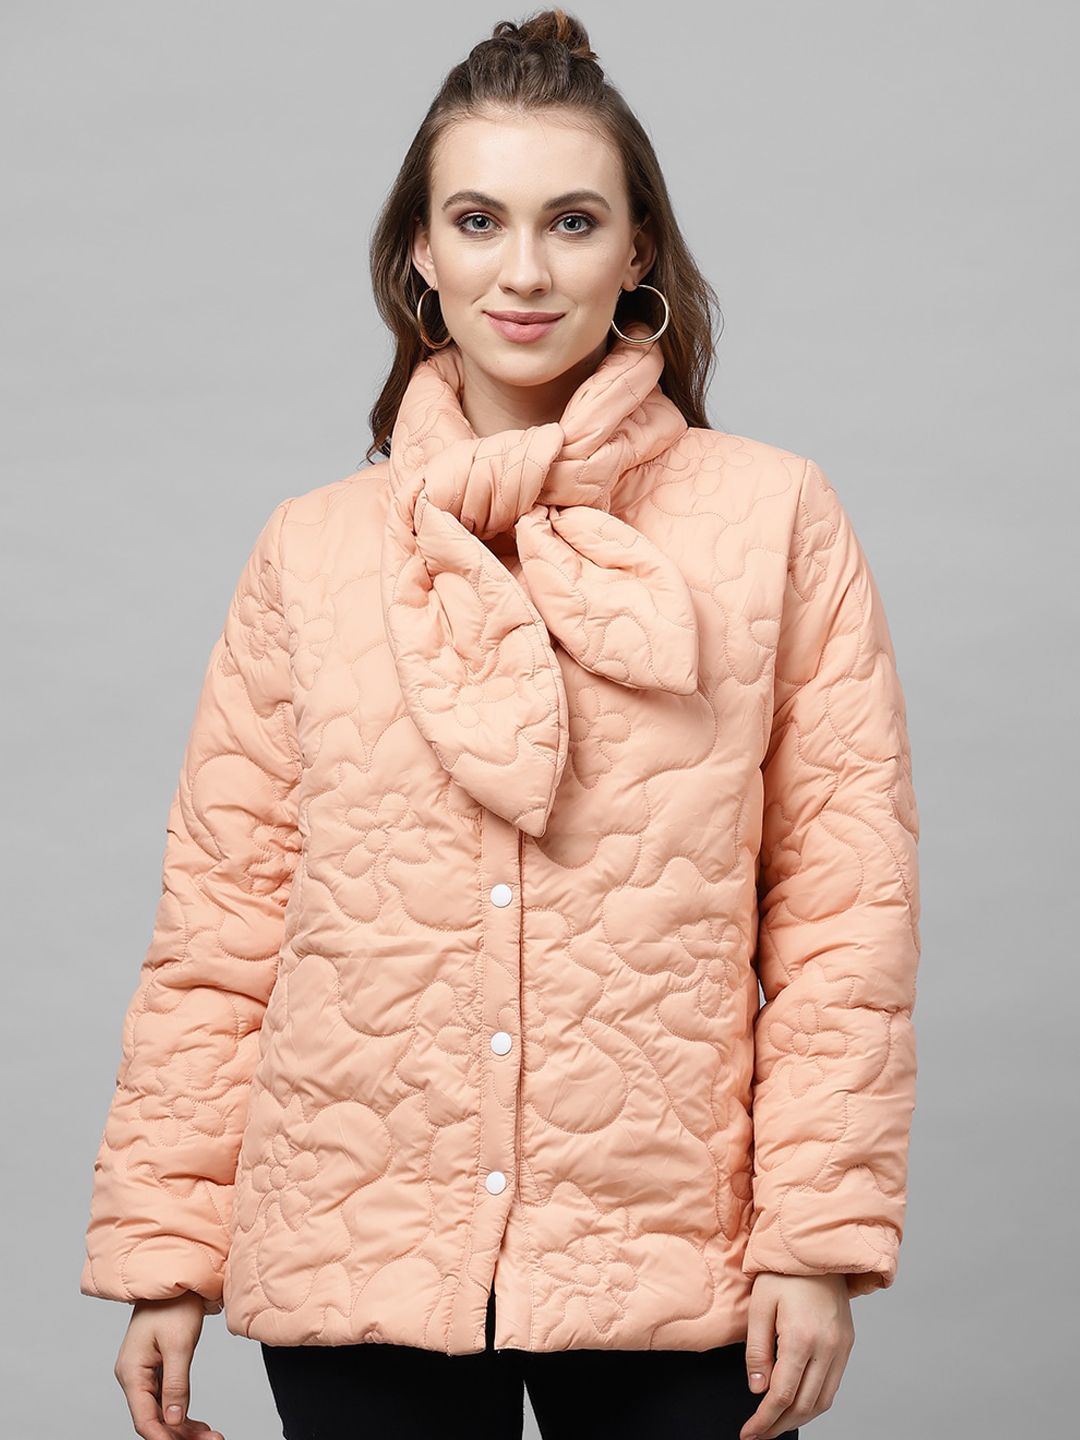 Athena Women Peach-Coloured Solid Lightweight Quilted Jacket Price in India